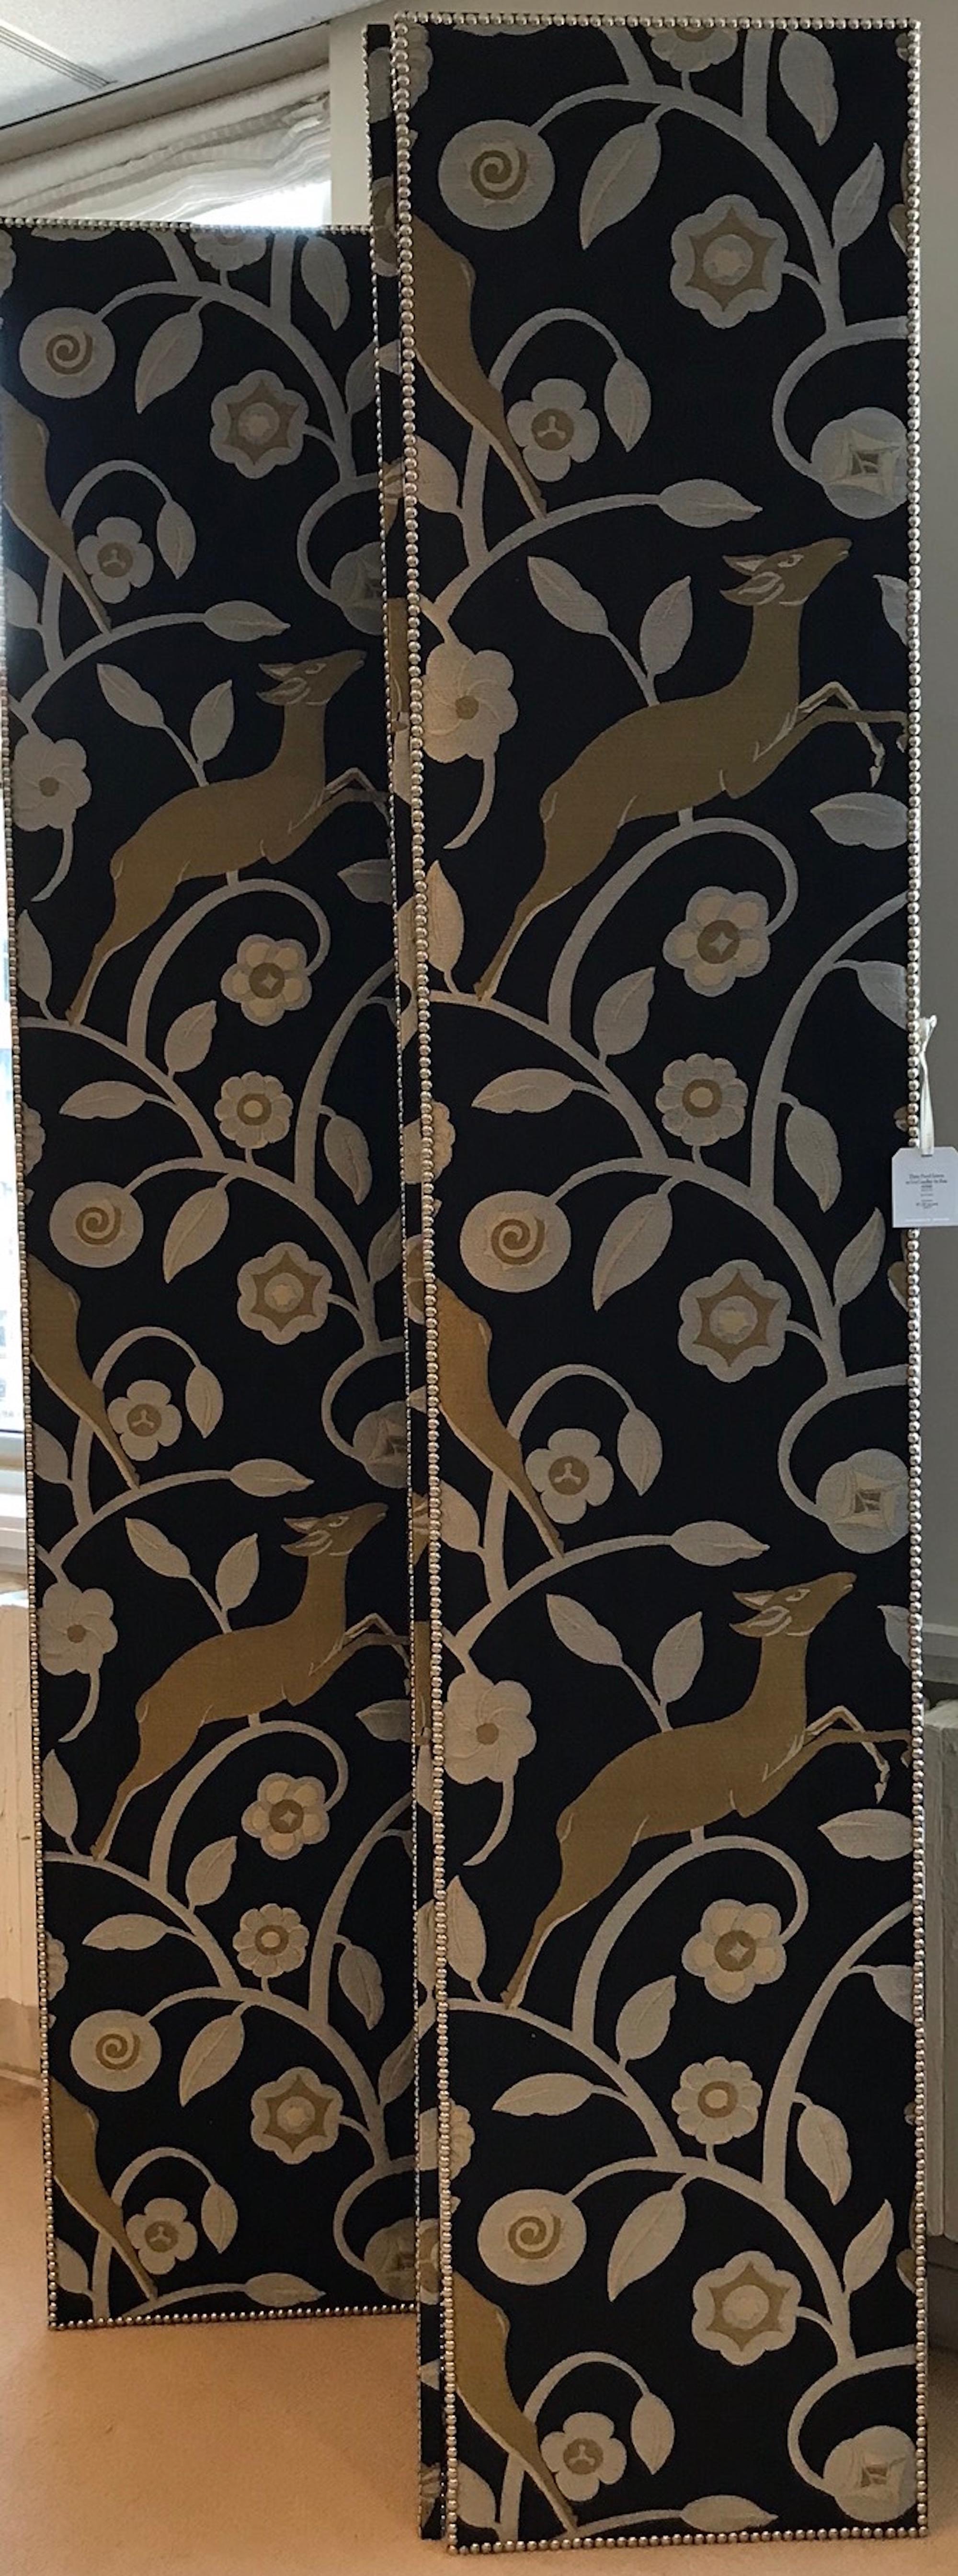 This three panel screen includes a floral and animal design that is colored in gold hues on a black backdrop. The nailhead detailing creates a clean boarder to this elegant accessory and room divider! 

Since Schumacher was founded in 1889, our